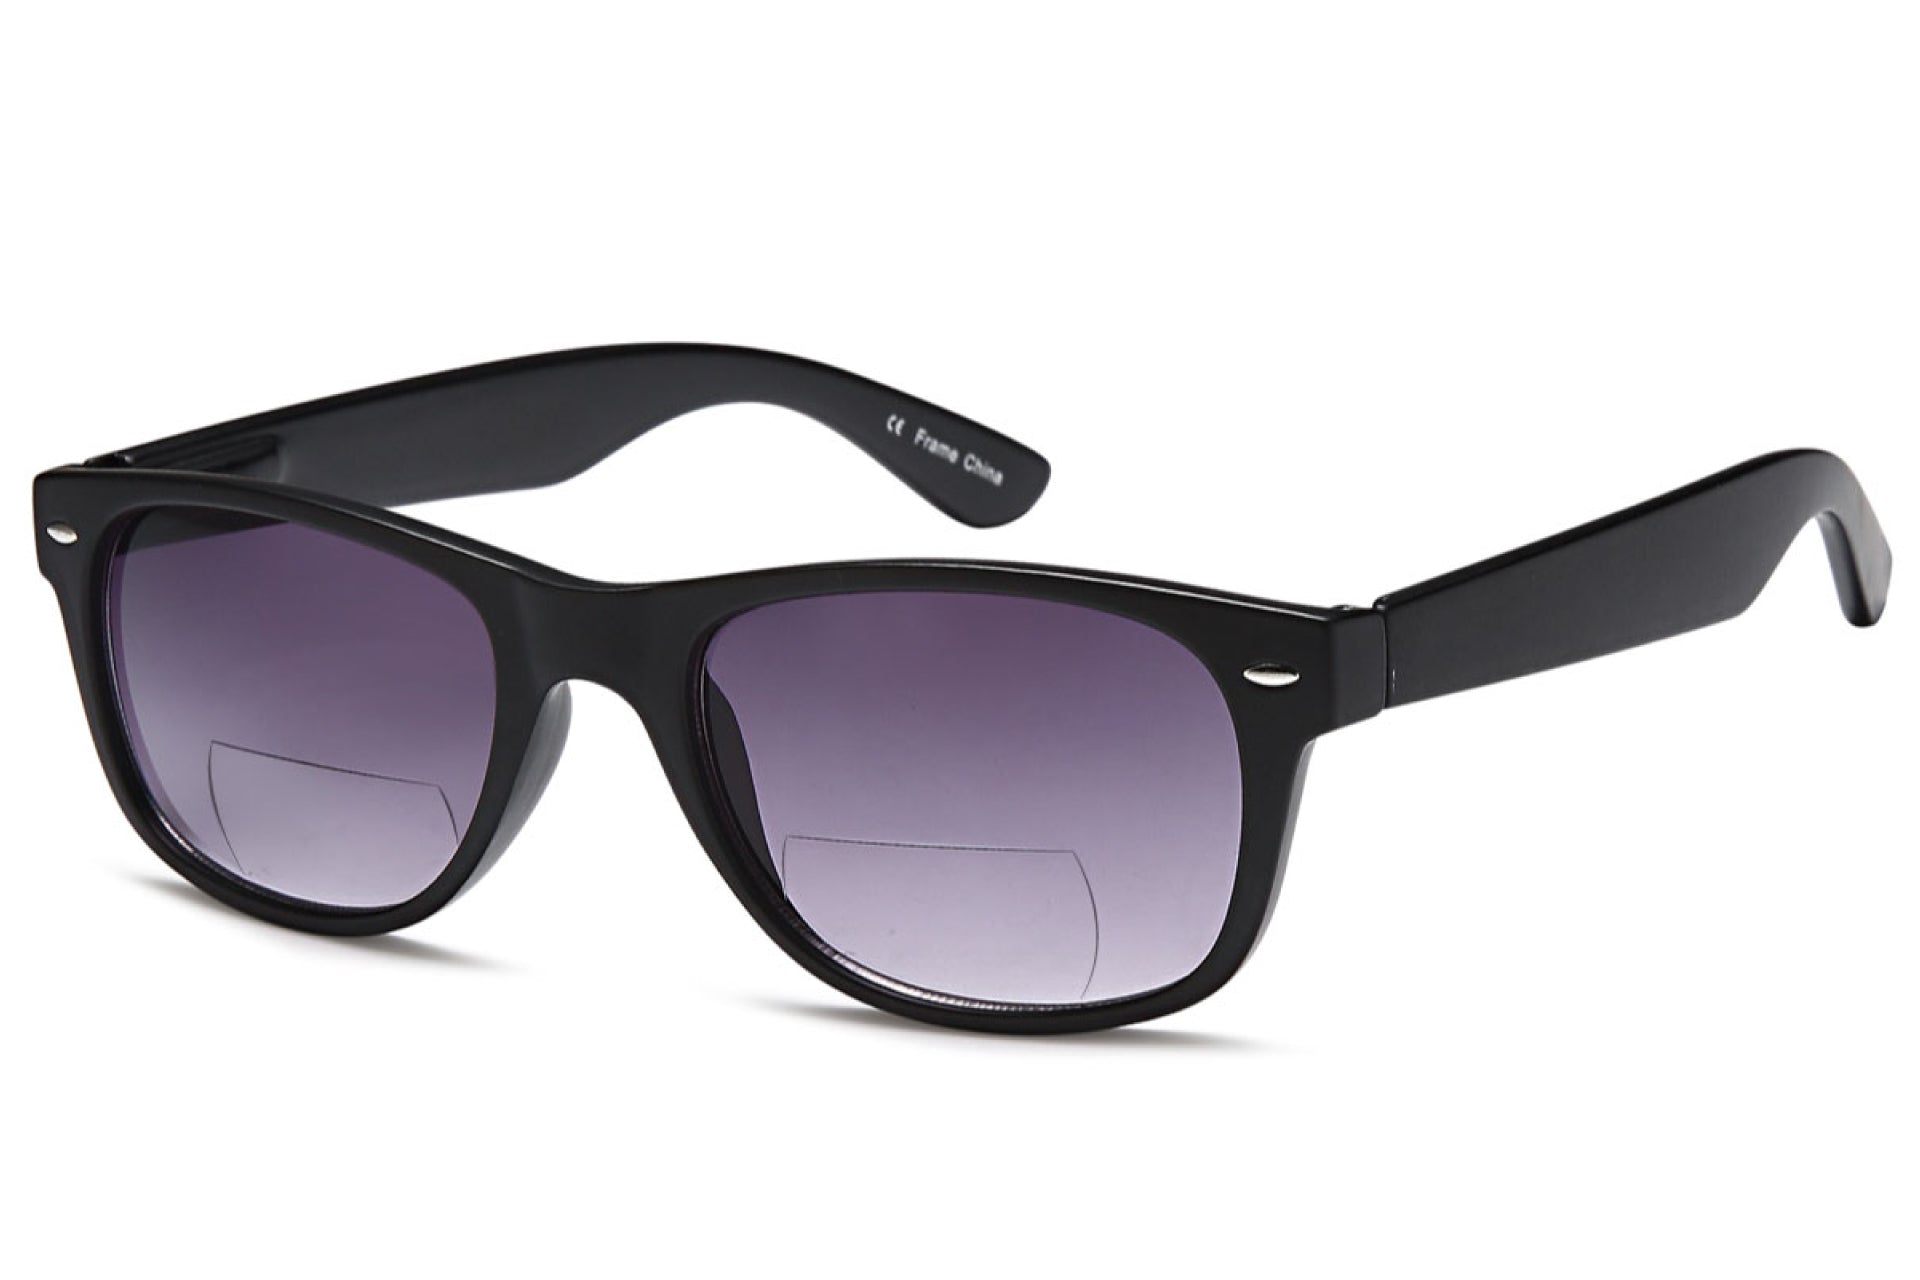 pair of gamma ray bifocal sunglasses with purple lens tint